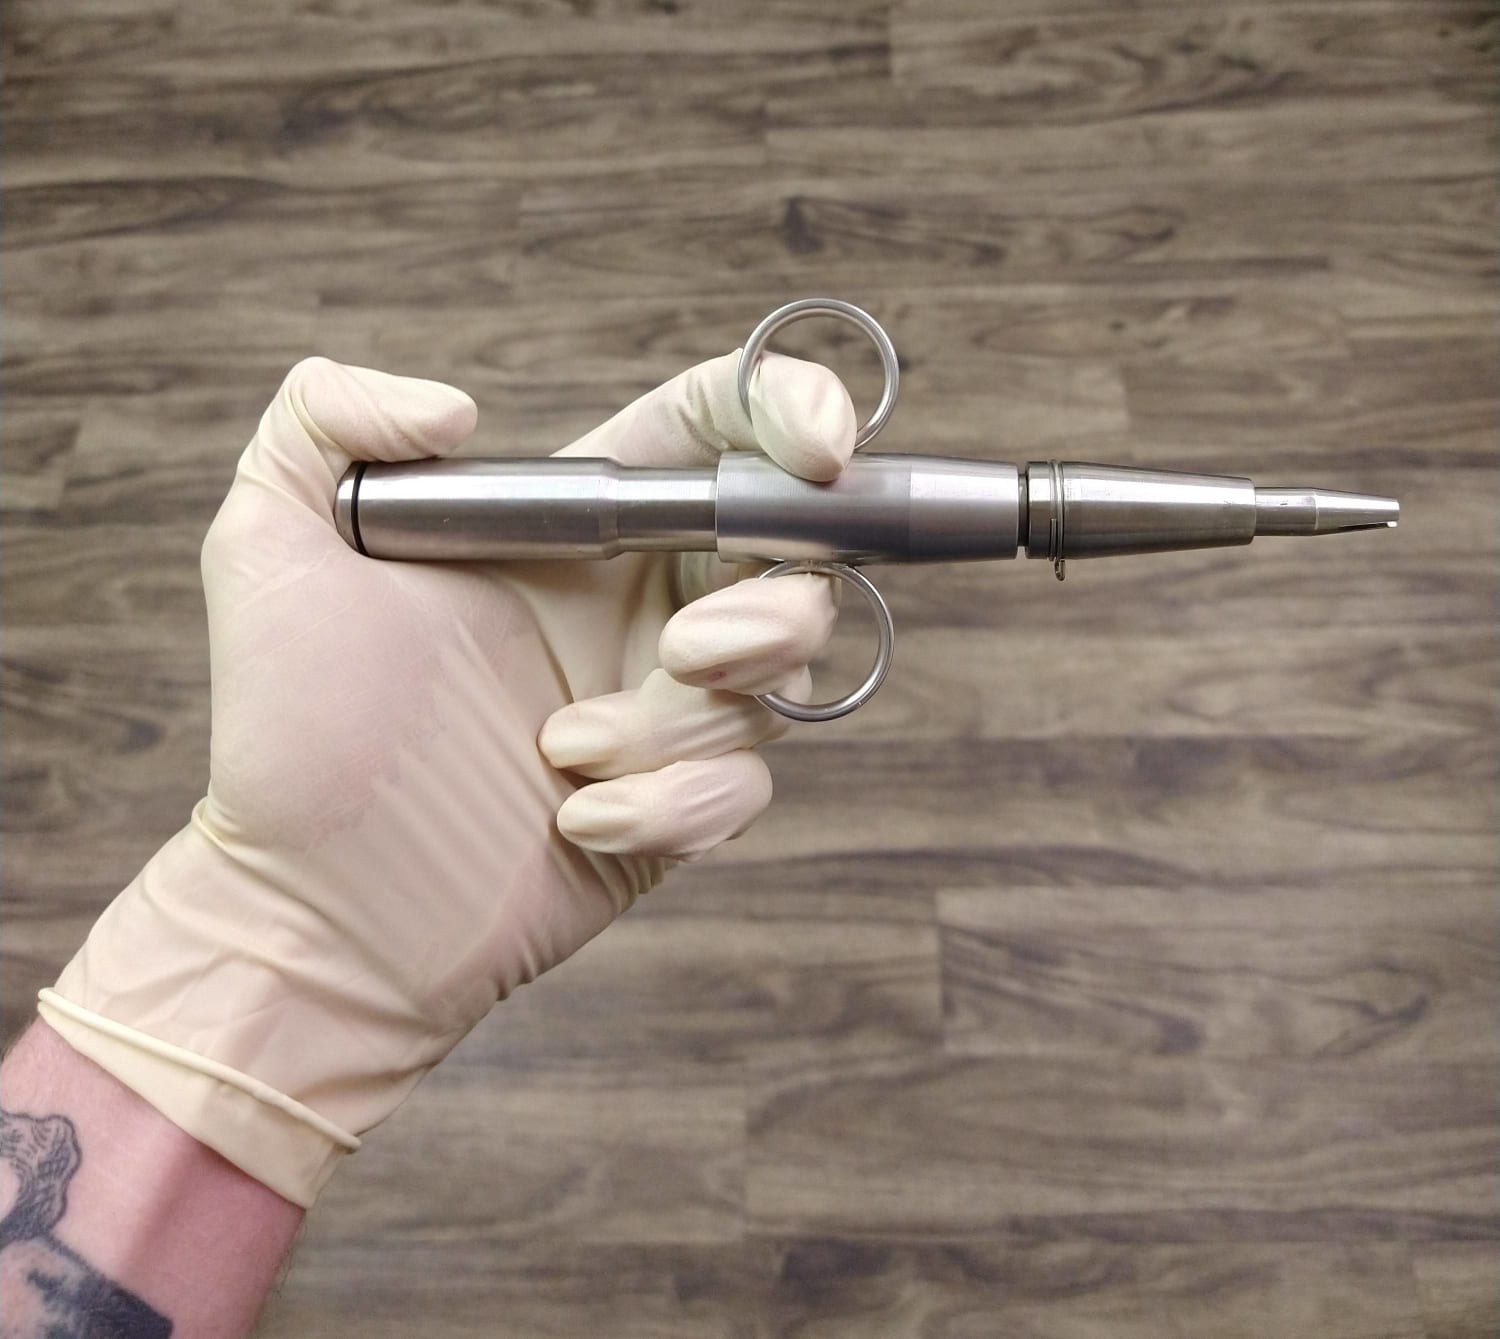 A needle injector, the preferred tool for sealing the mouth of a dead person.